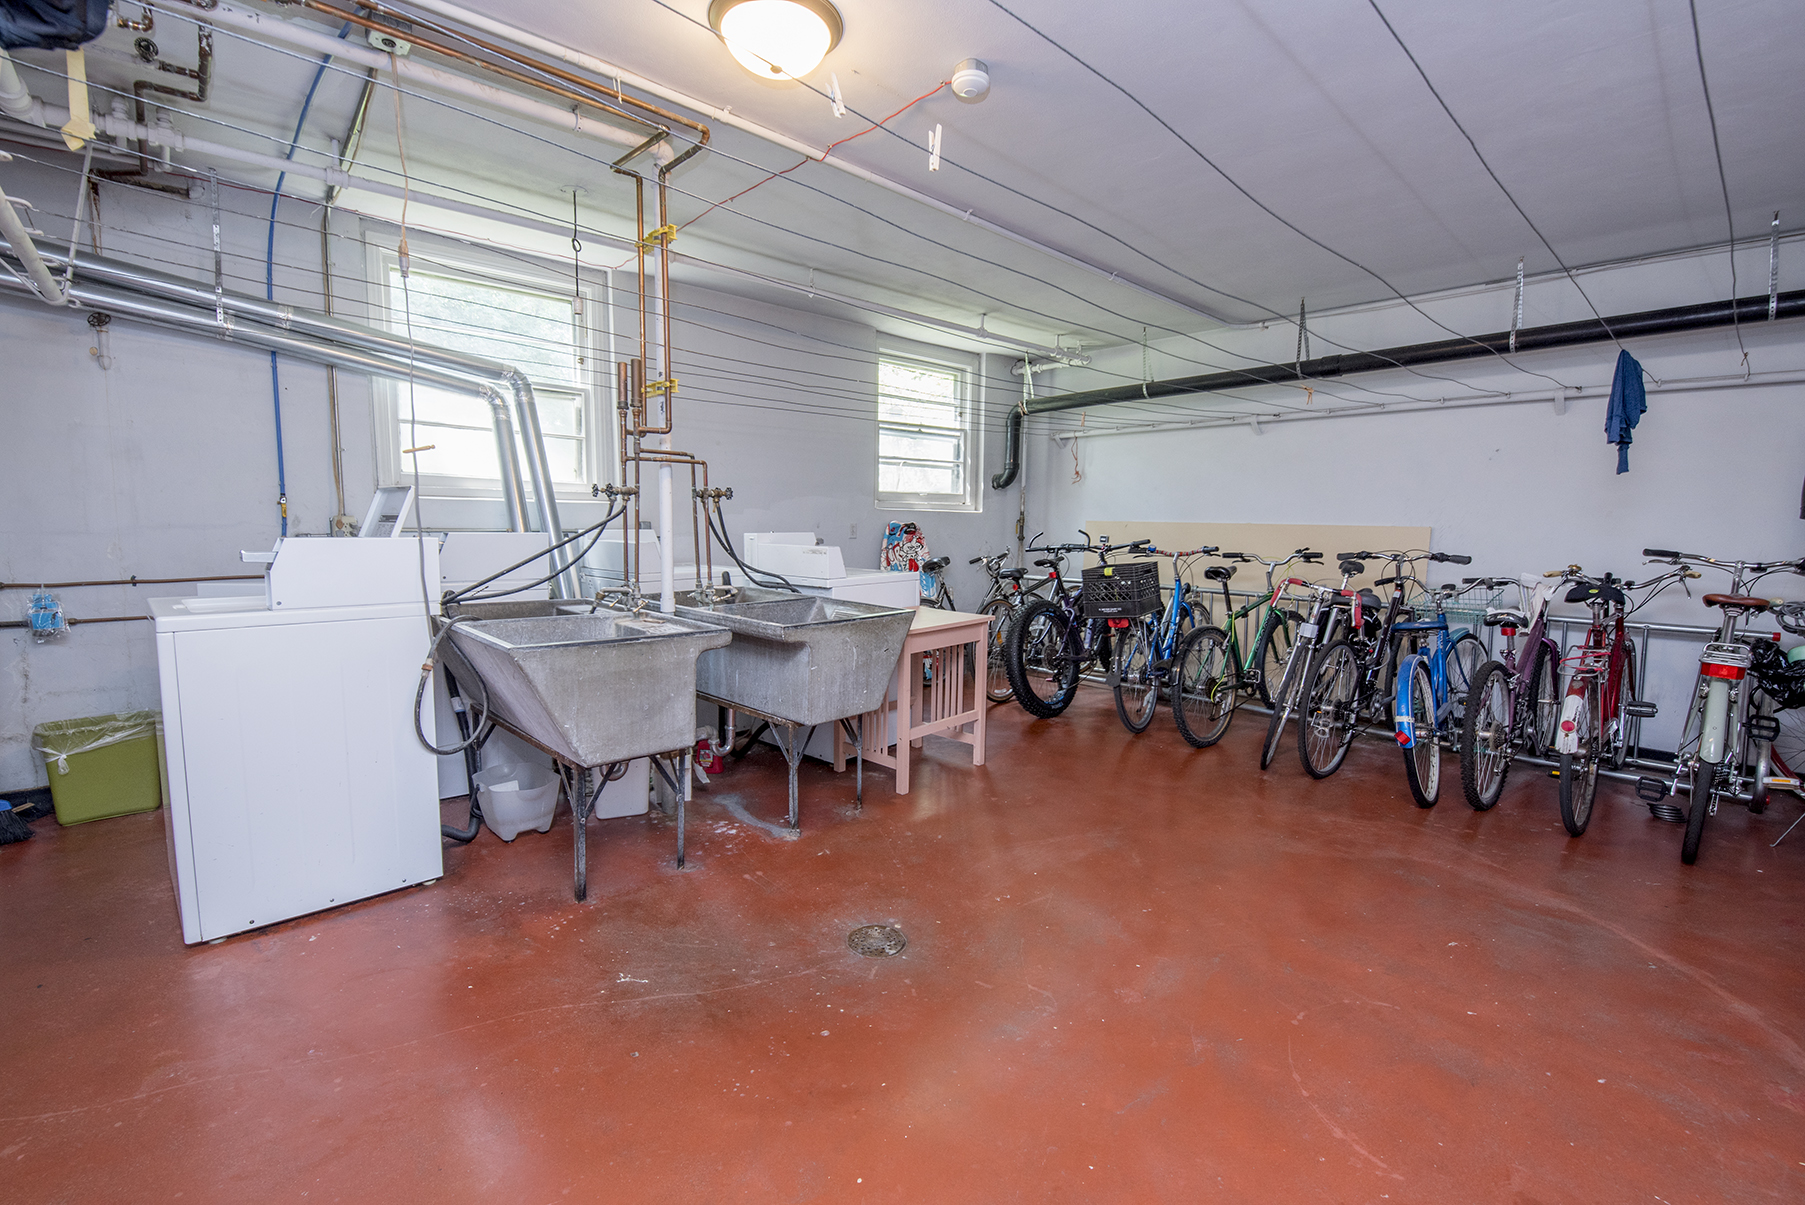 On-site laundry, storage space for each apartment and interior space for bicycle storage.